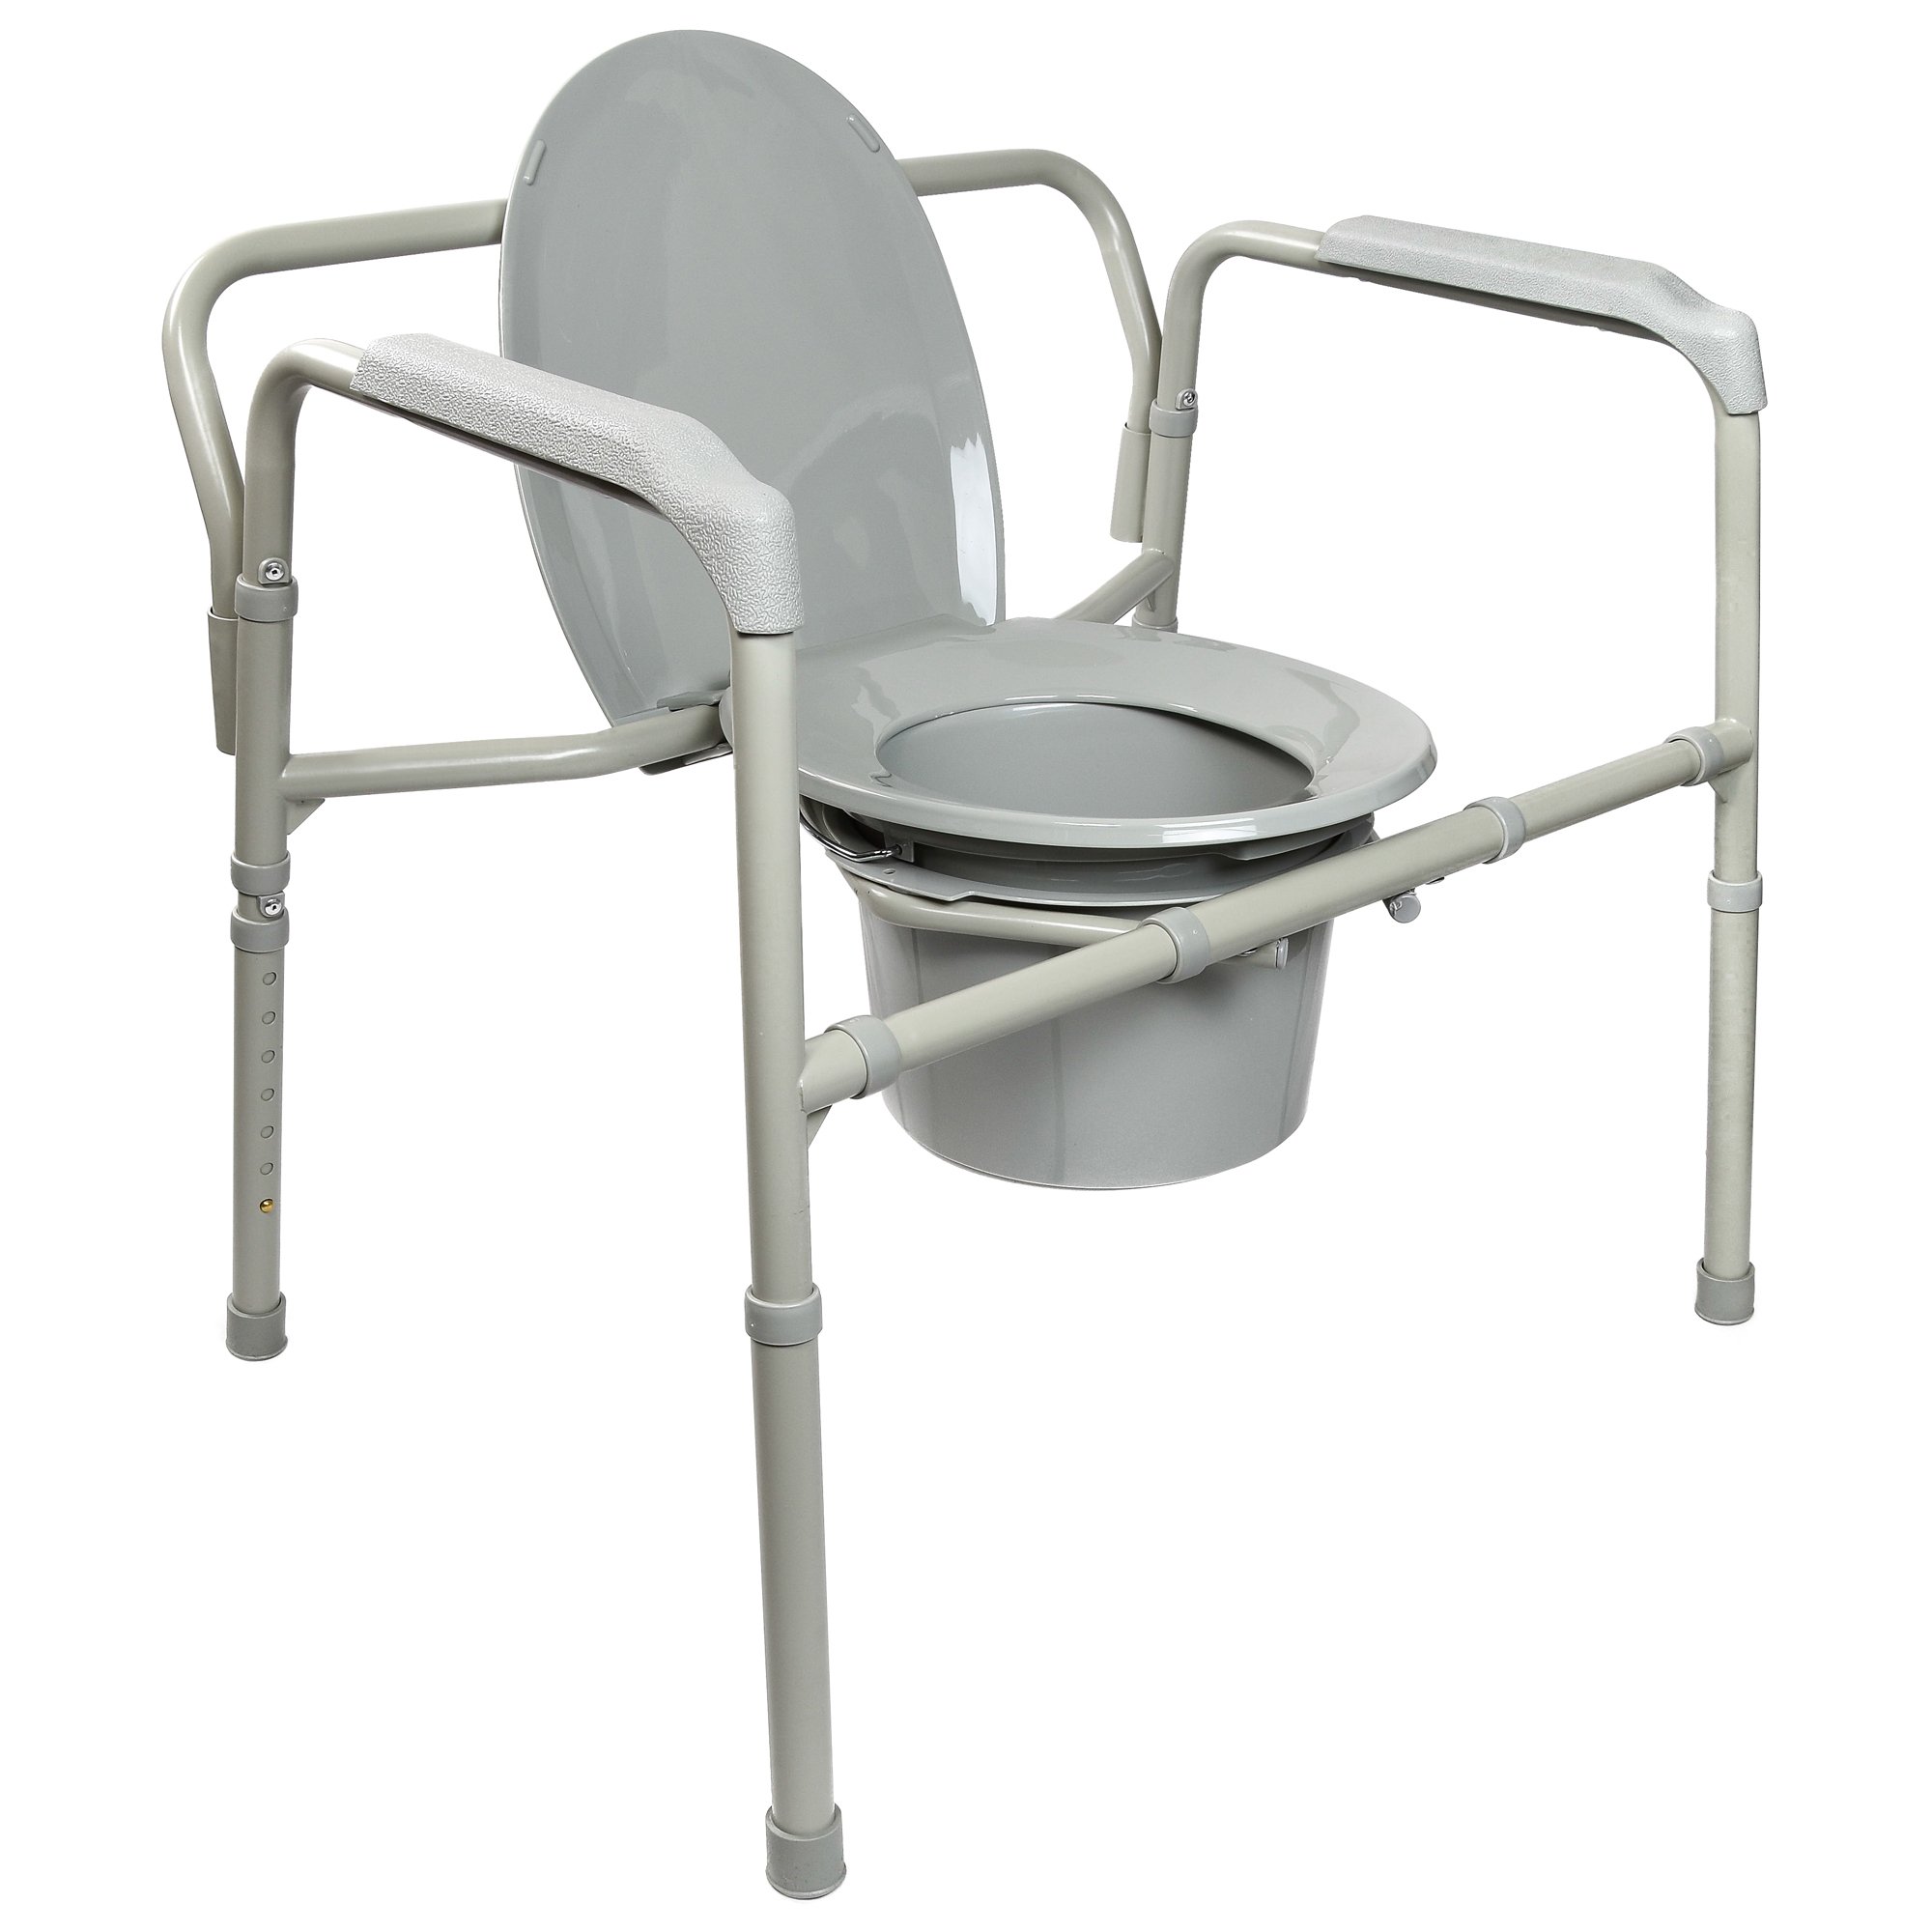 McKesson Commode Chair 13-3/4 Inch Seat Width 650 Lbs. Weight Capacity, Gray , CVS